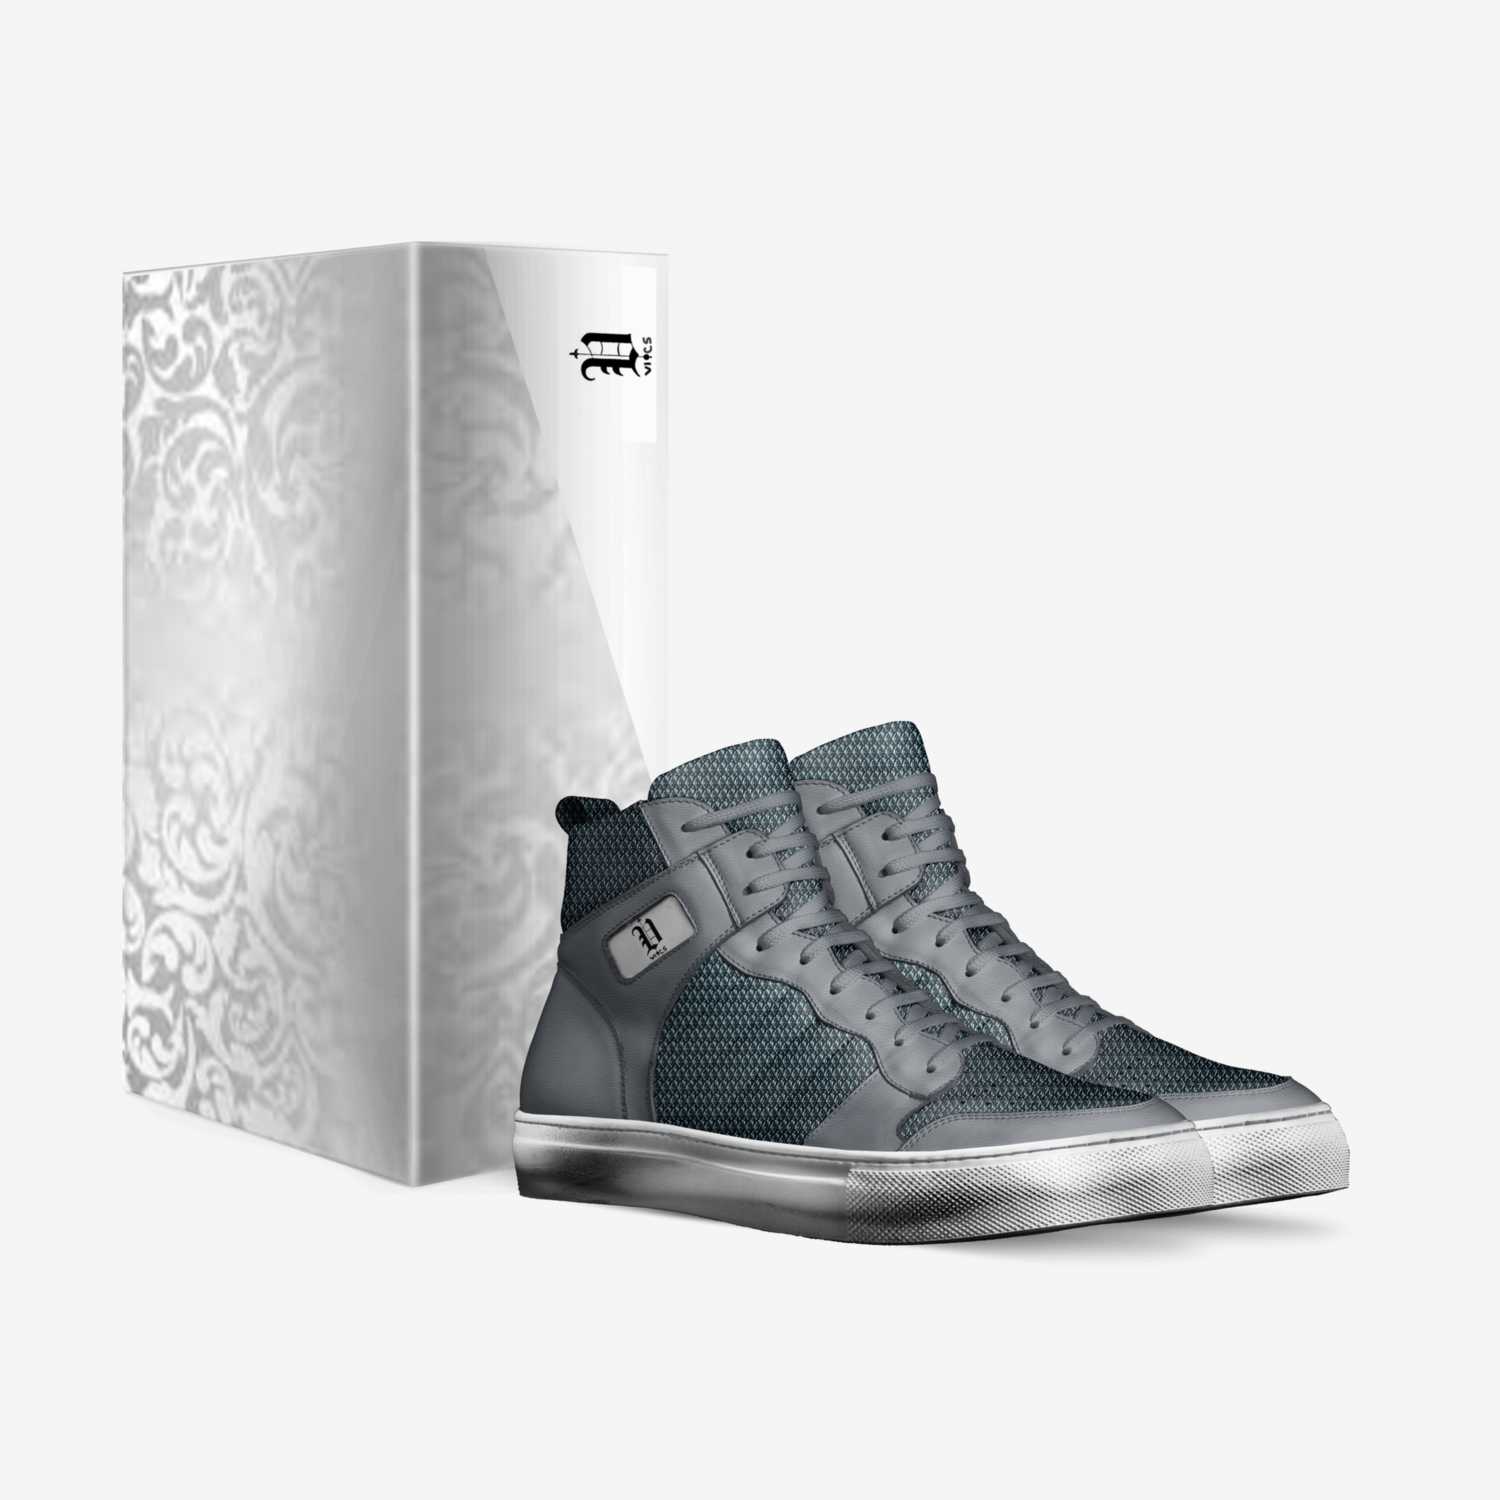 vics silver style custom made in Italy shoes by Brayden Murphy | Box view